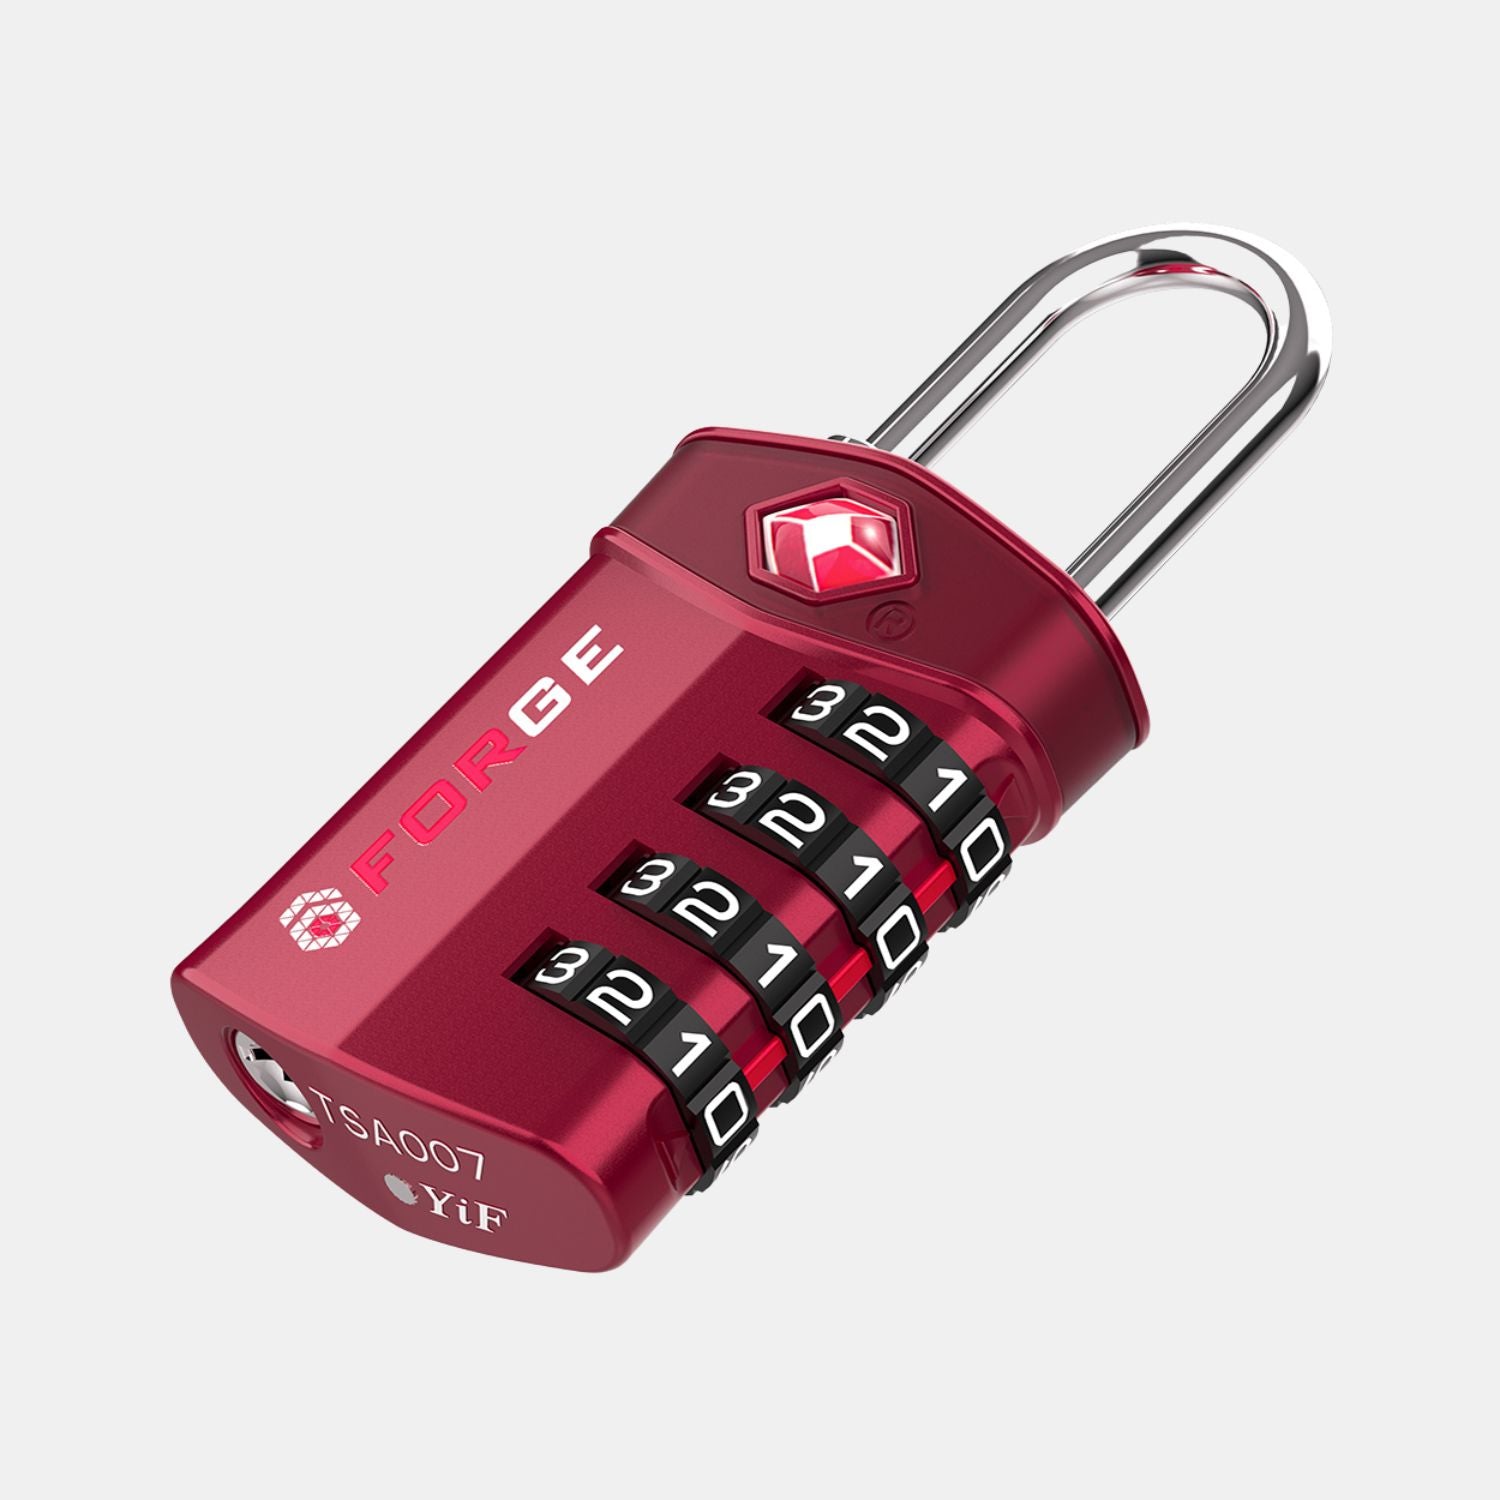 TSA Approved 4-Digit Combination Locks for Luggage and Suitcases. Open Alert, Alloy Body. Red 4 Locks